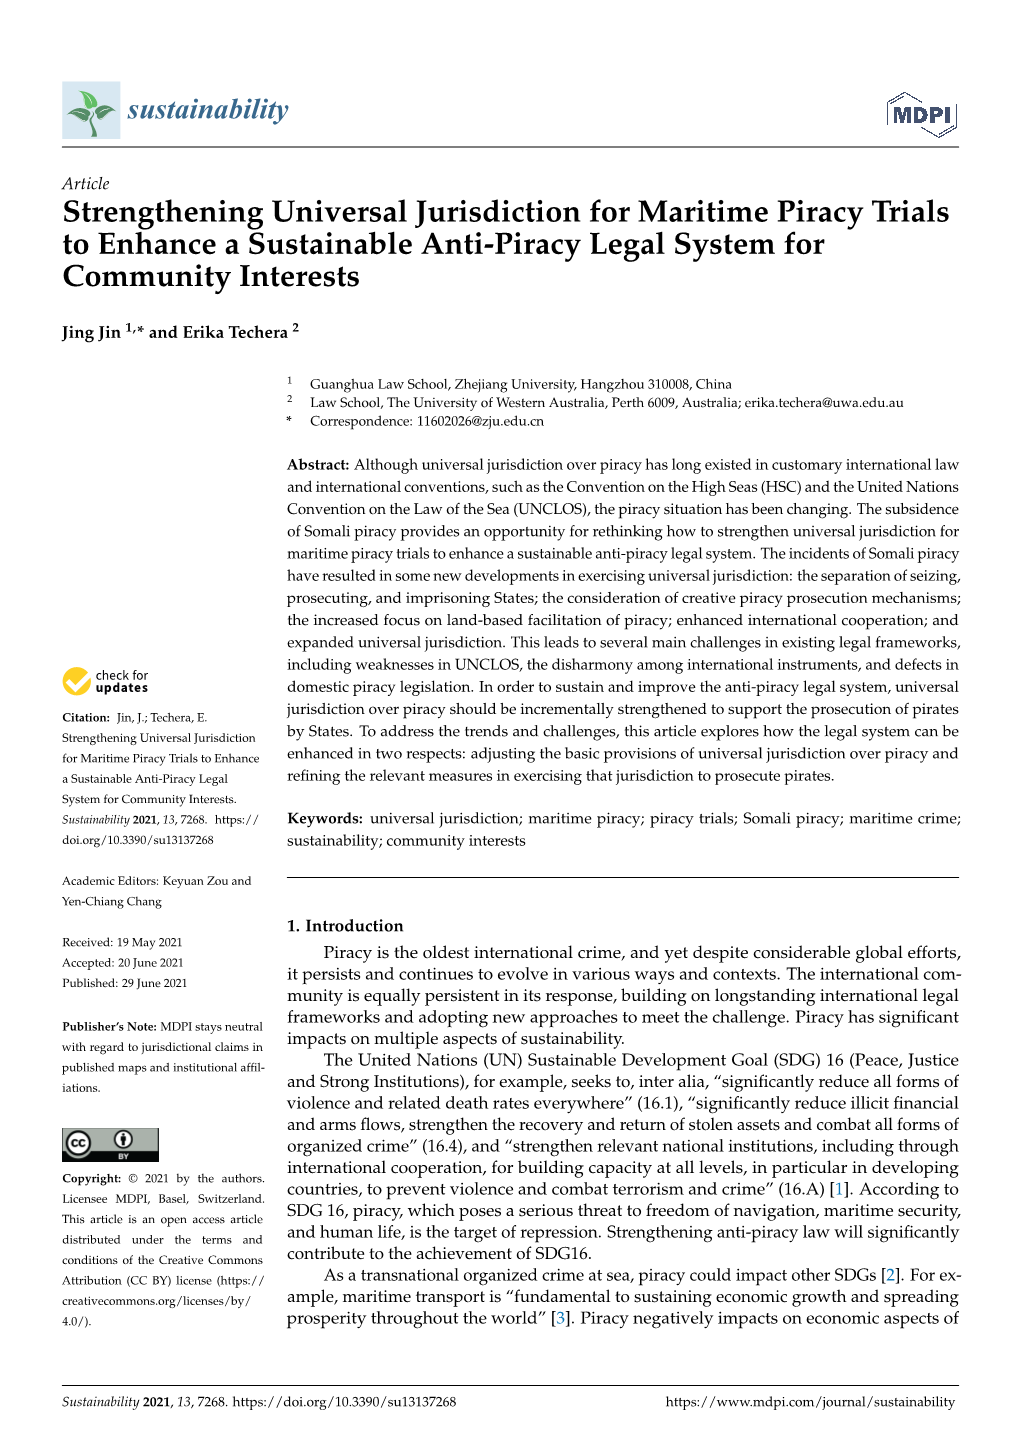 Strengthening Universal Jurisdiction for Maritime Piracy Trials to Enhance a Sustainable Anti-Piracy Legal System for Community Interests